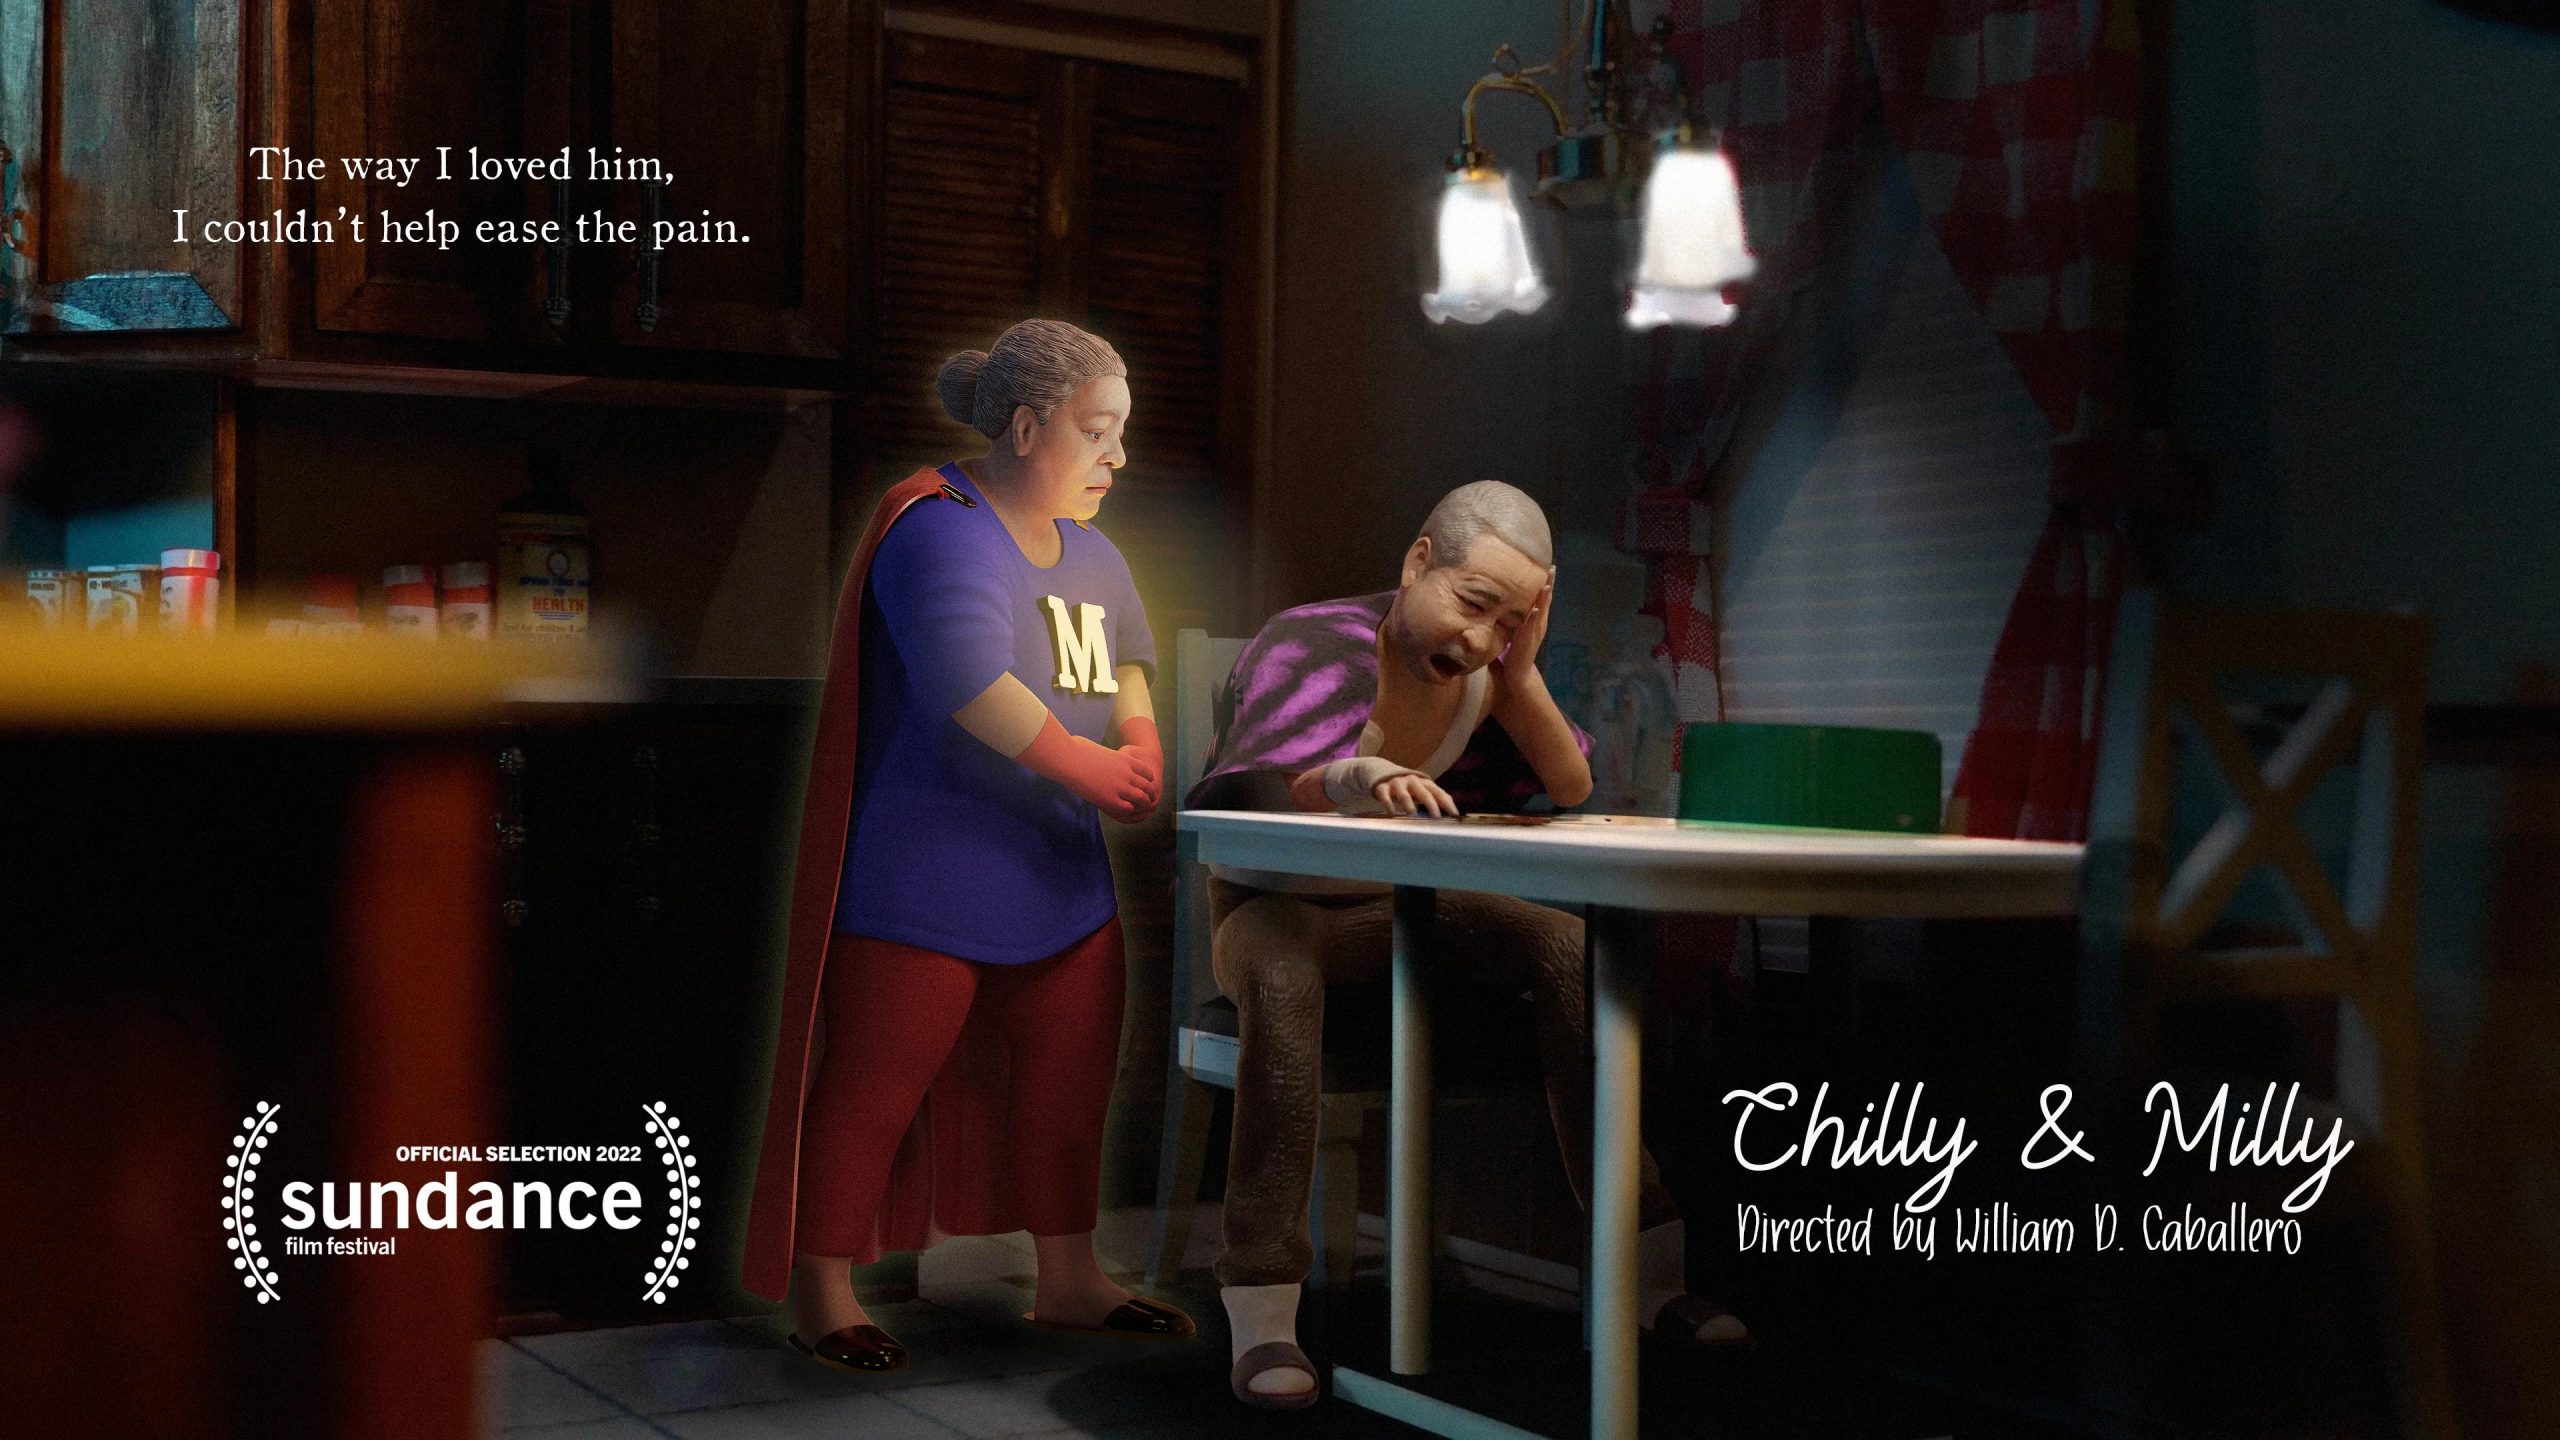 “CHILLY & MILLY” on Vimeo [Video]